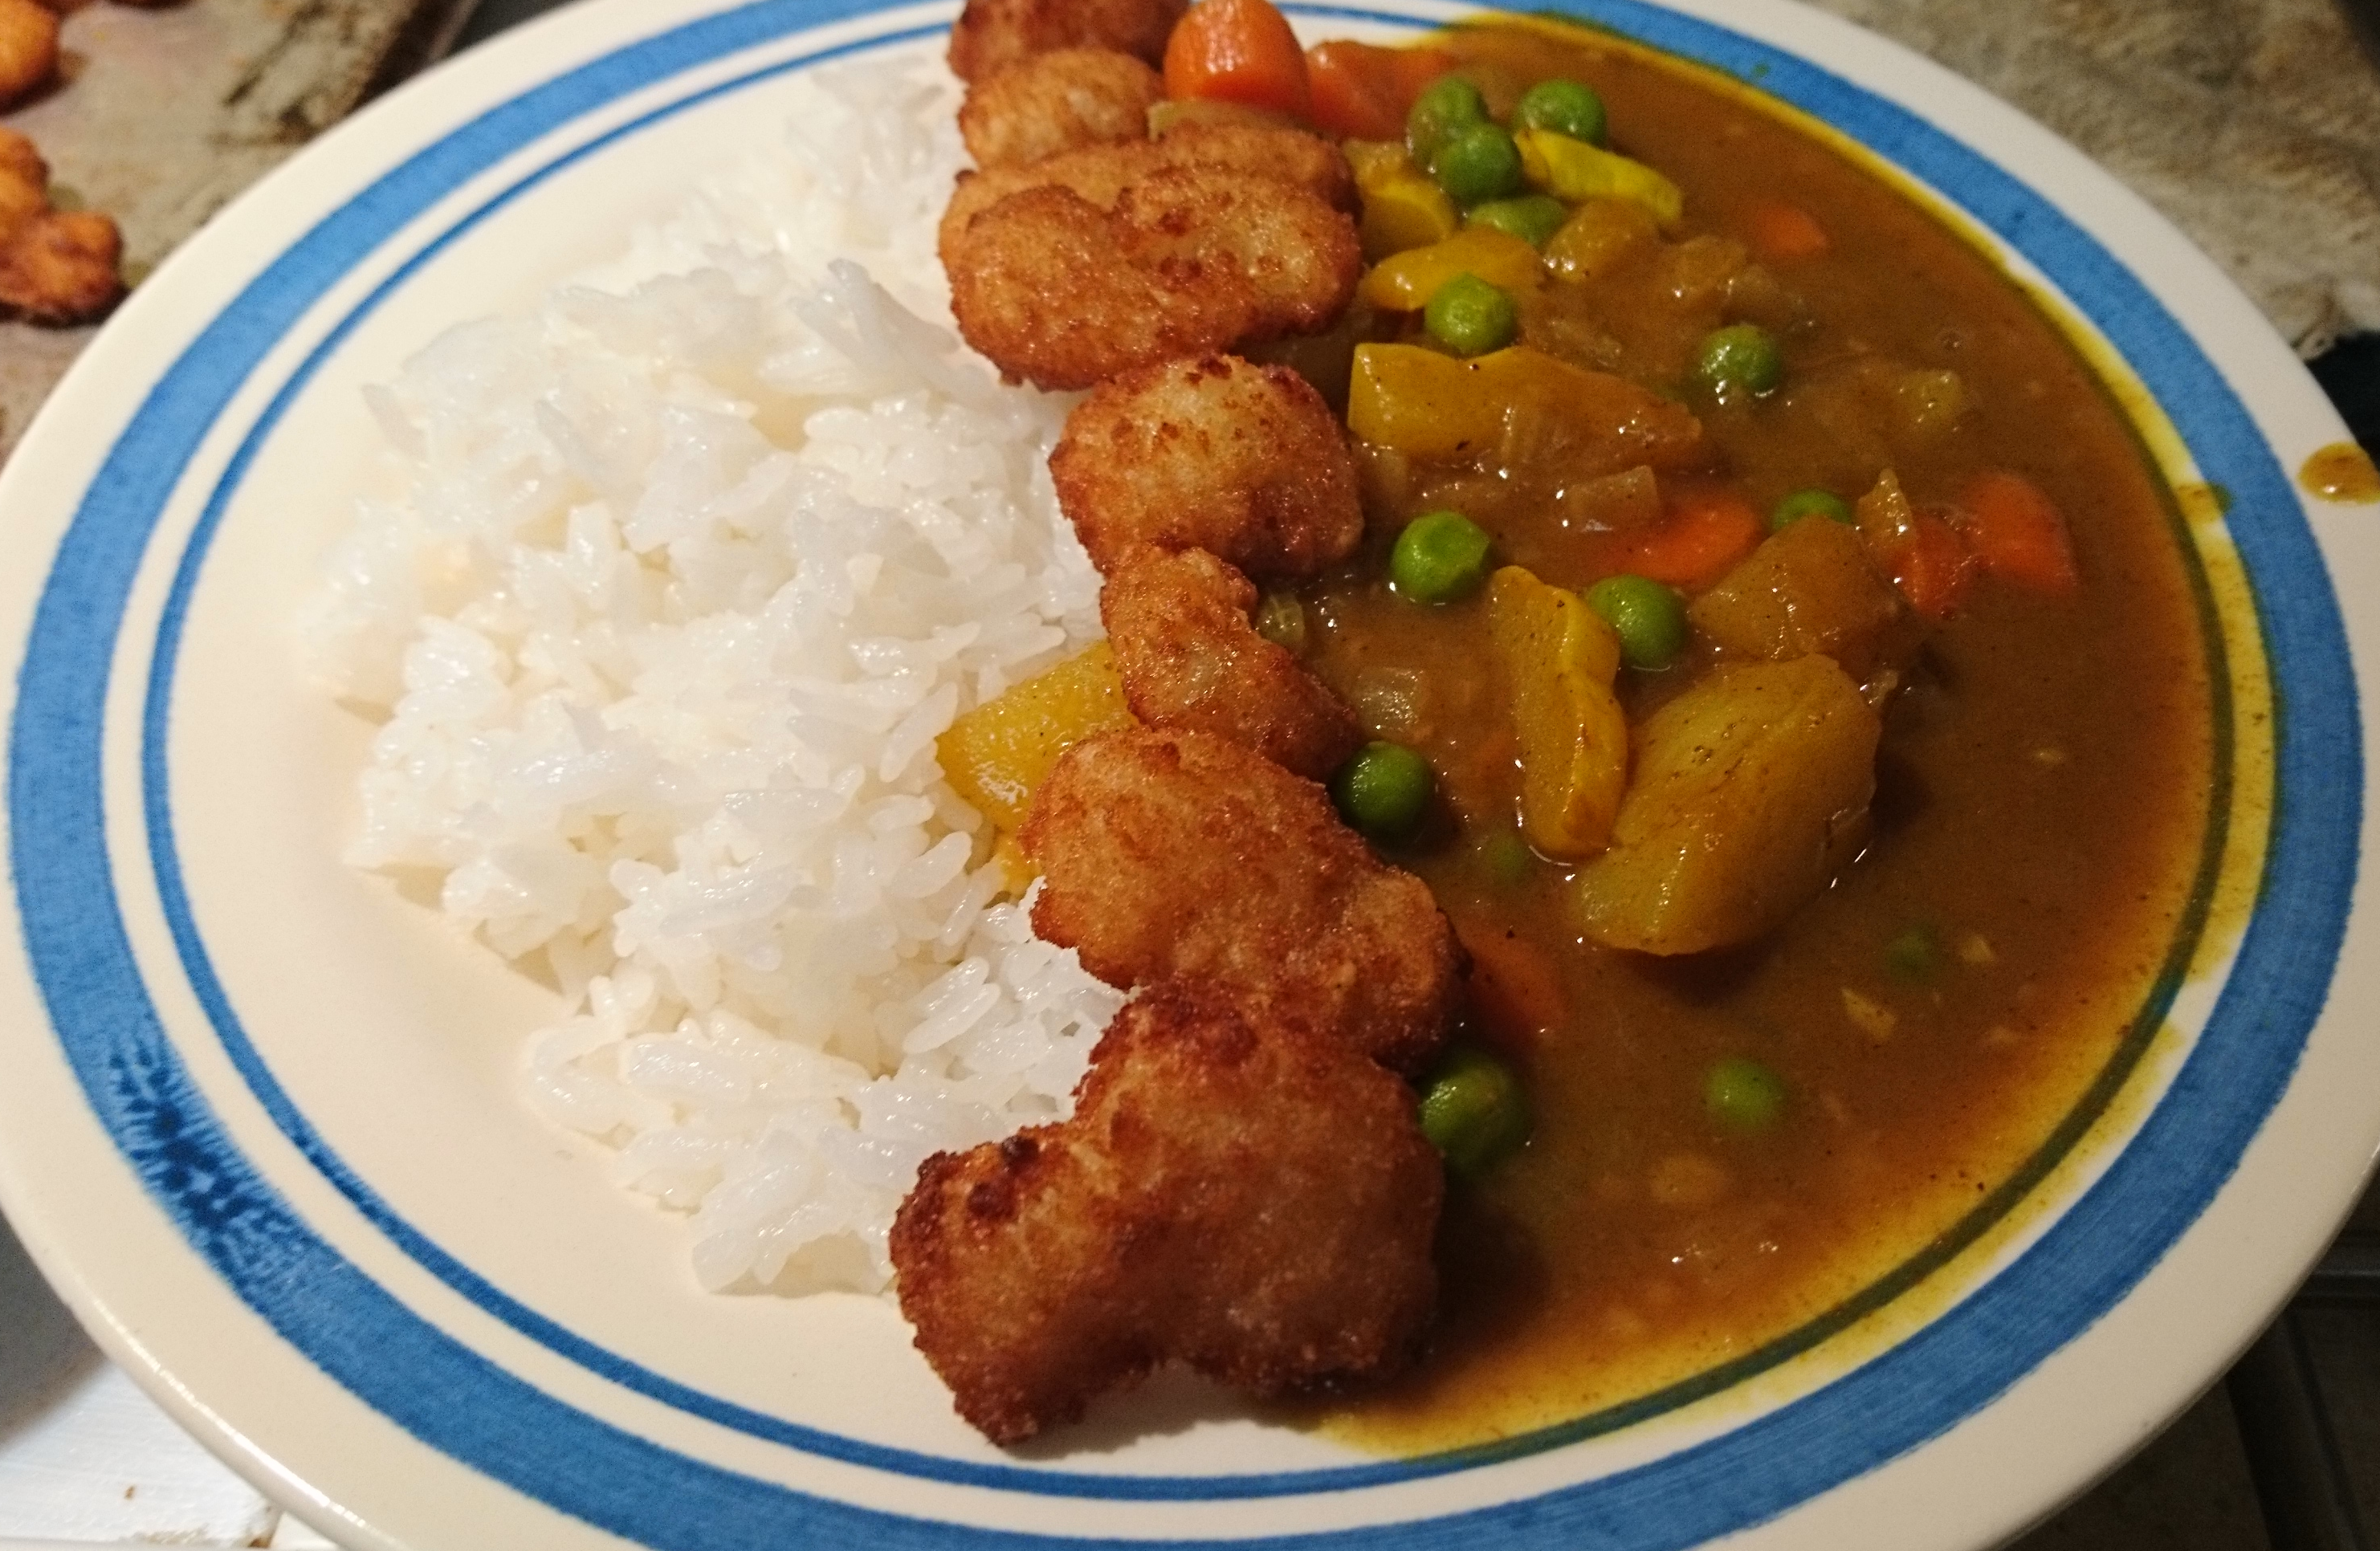 japanese curry, plated side-by-side with rice